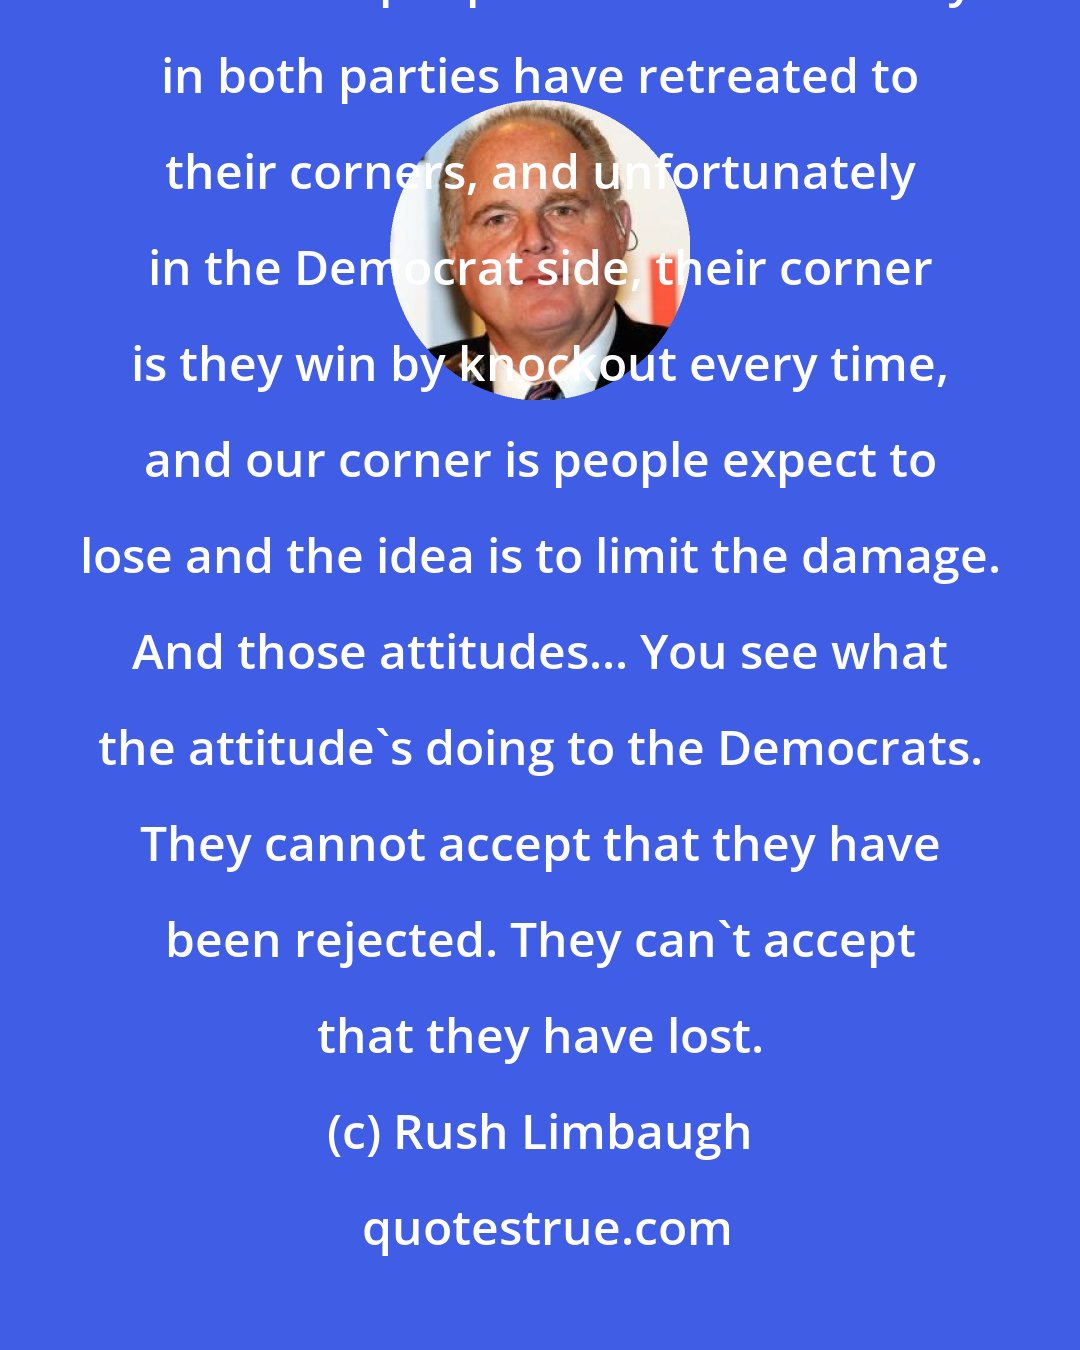 Rush Limbaugh: I'm talking about the attitude of winning and the can-do spirit and how I think people inside the Beltway in both parties have retreated to their corners, and unfortunately in the Democrat side, their corner is they win by knockout every time, and our corner is people expect to lose and the idea is to limit the damage. And those attitudes... You see what the attitude's doing to the Democrats. They cannot accept that they have been rejected. They can't accept that they have lost.